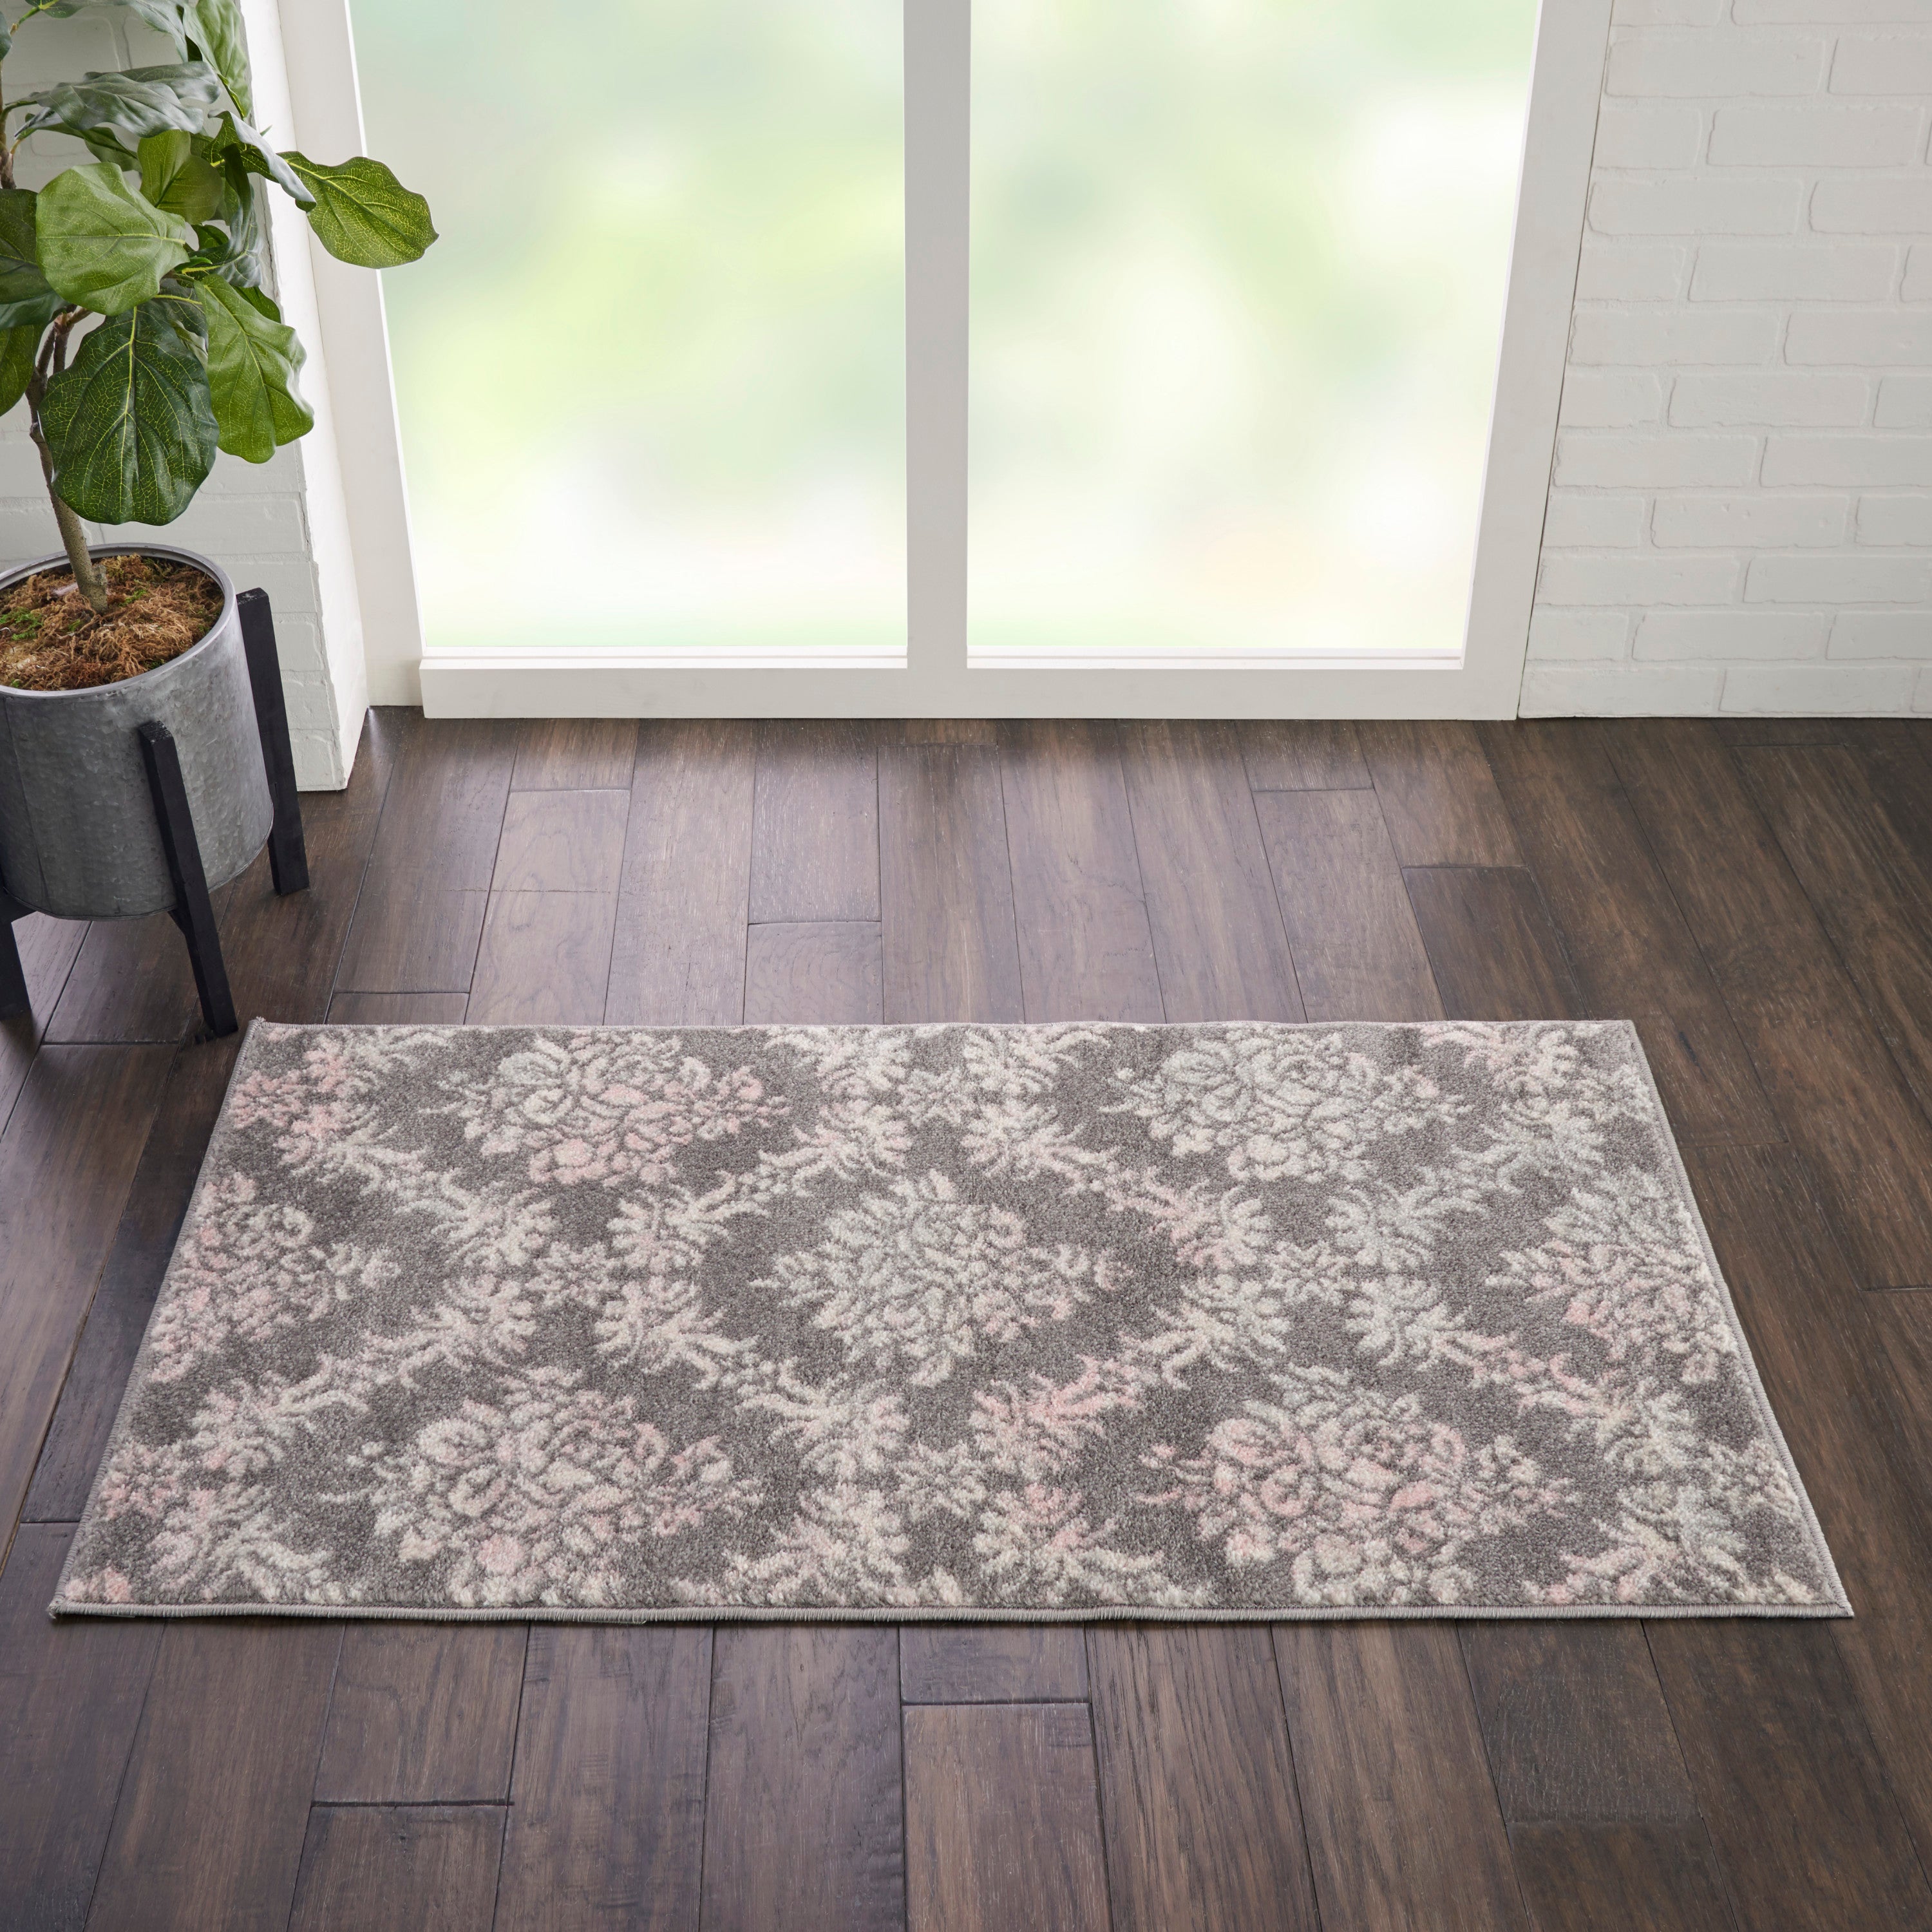 Nourison Tranquil TRA09 Grey/Pink Area Rug